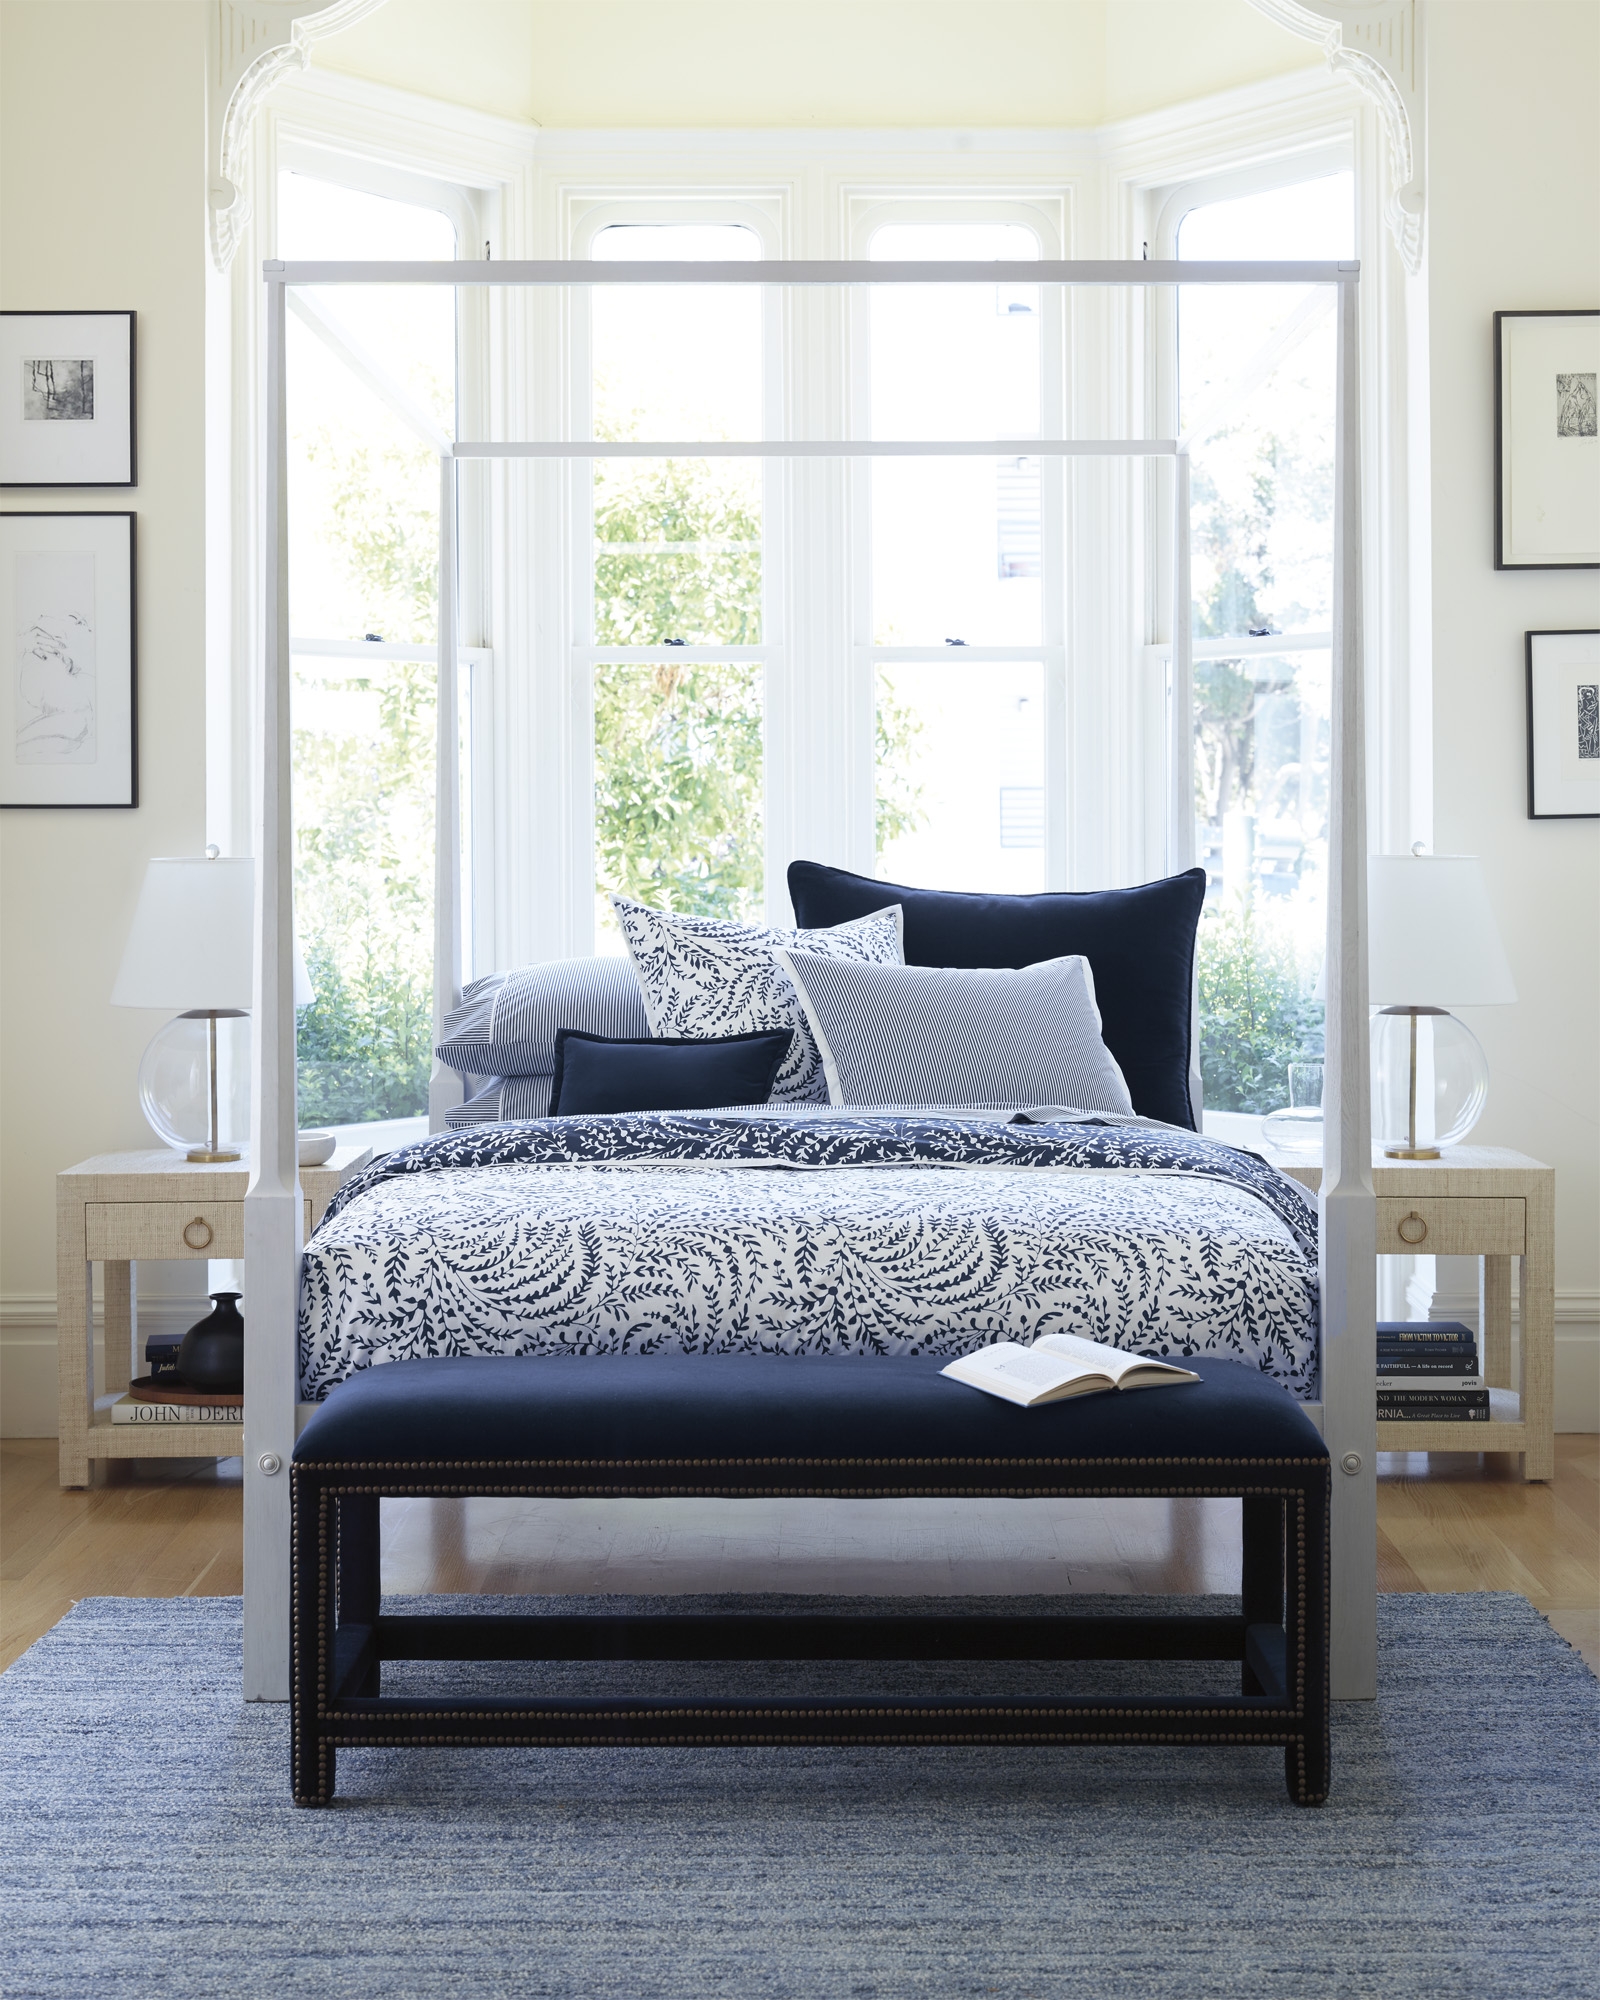 Priano Full/Queen Duvet Cover - Navy - Insert sold separately - Image 2